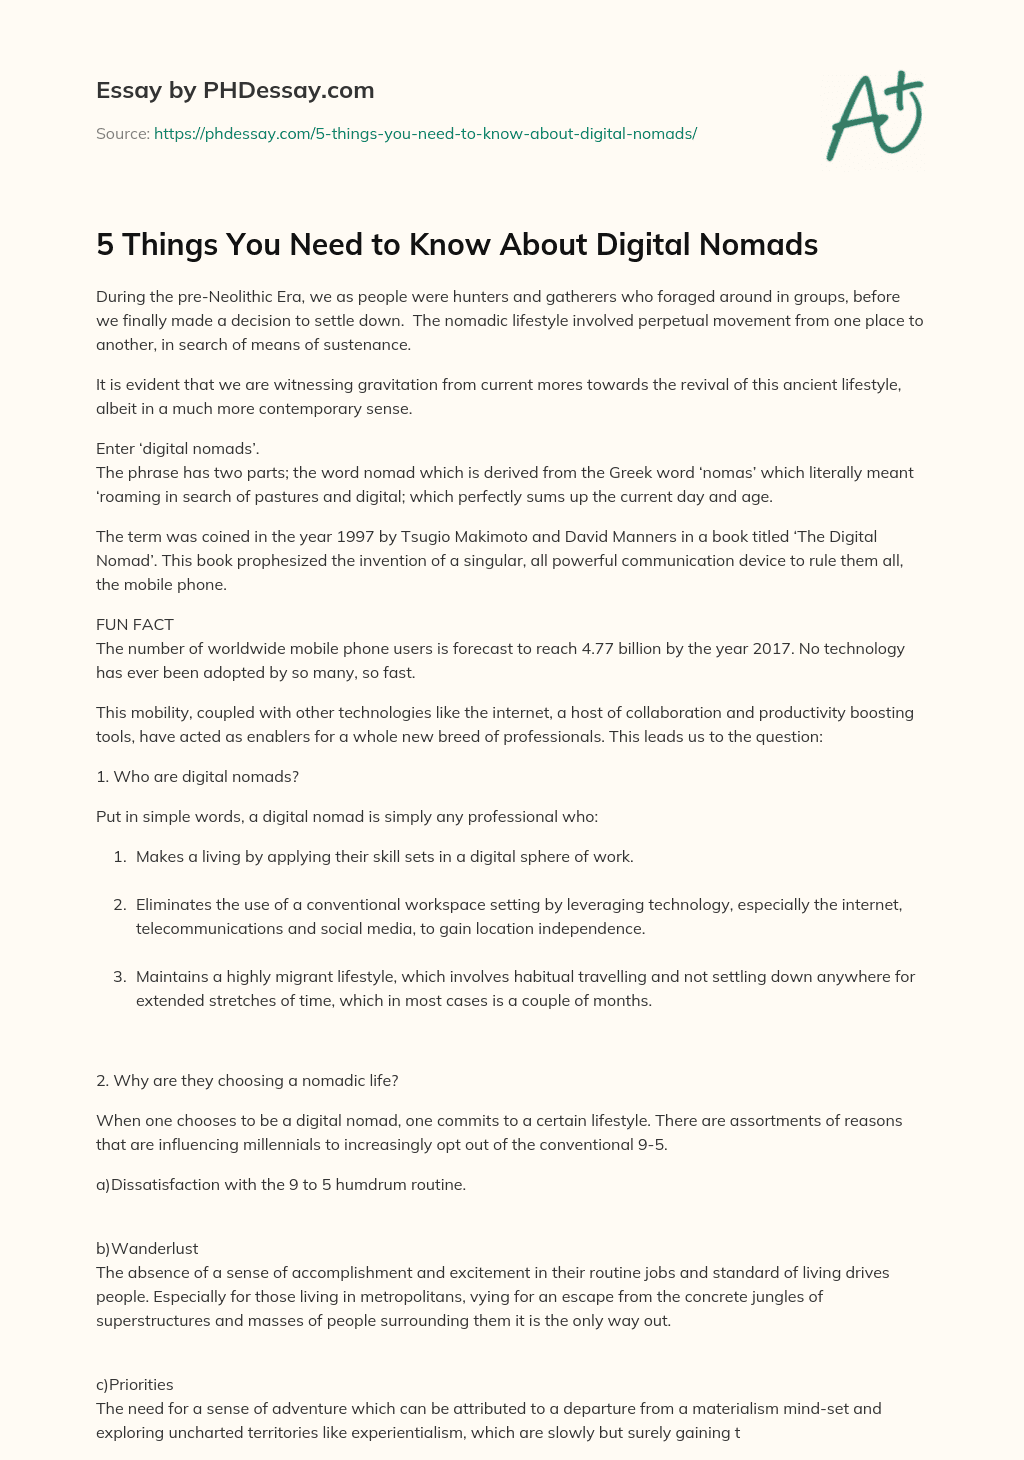 5 Things You Need to Know About Digital Nomads essay